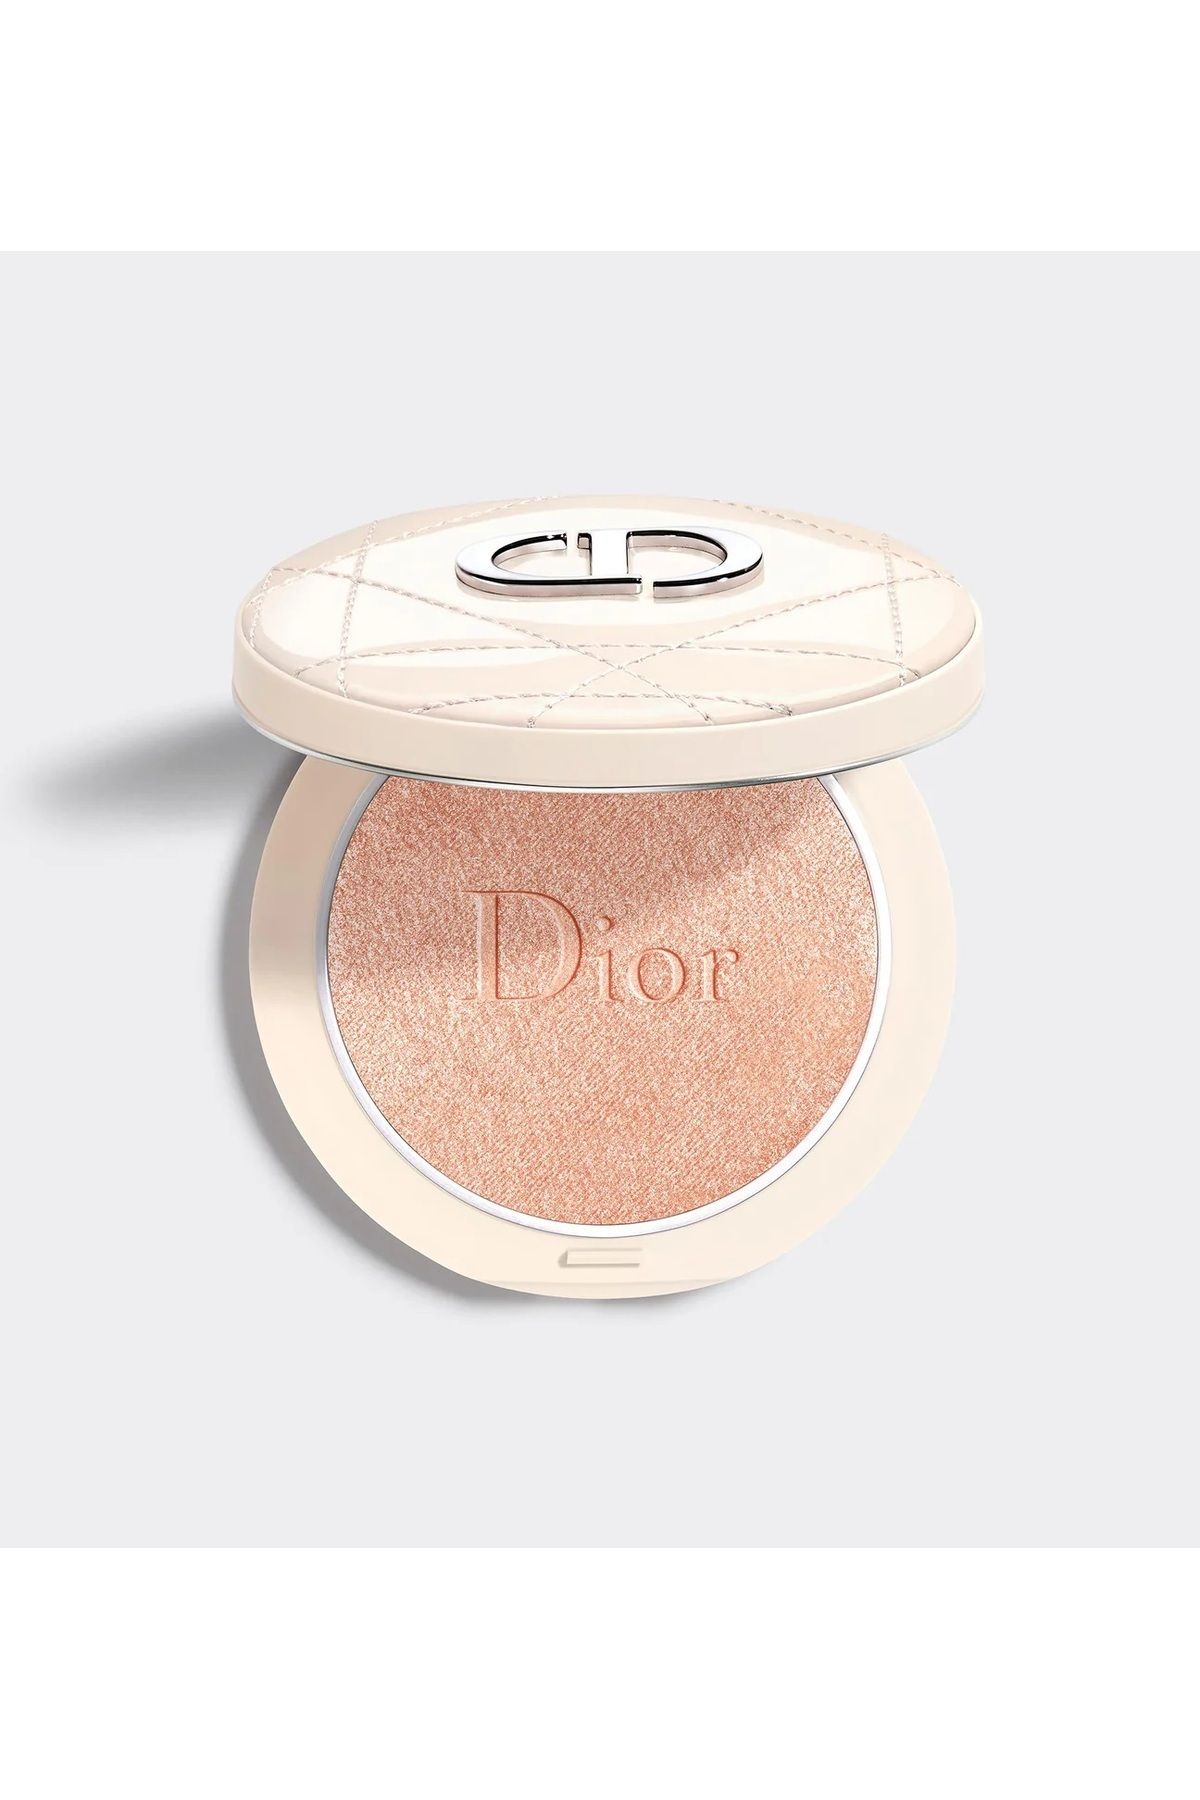 Dior FOREVER COUTURE- MOİSTURİZİNG NATURAL PİGMENTED SHİMMERİNG ILLUMİNATİNG POWDER 6G PSSN2048